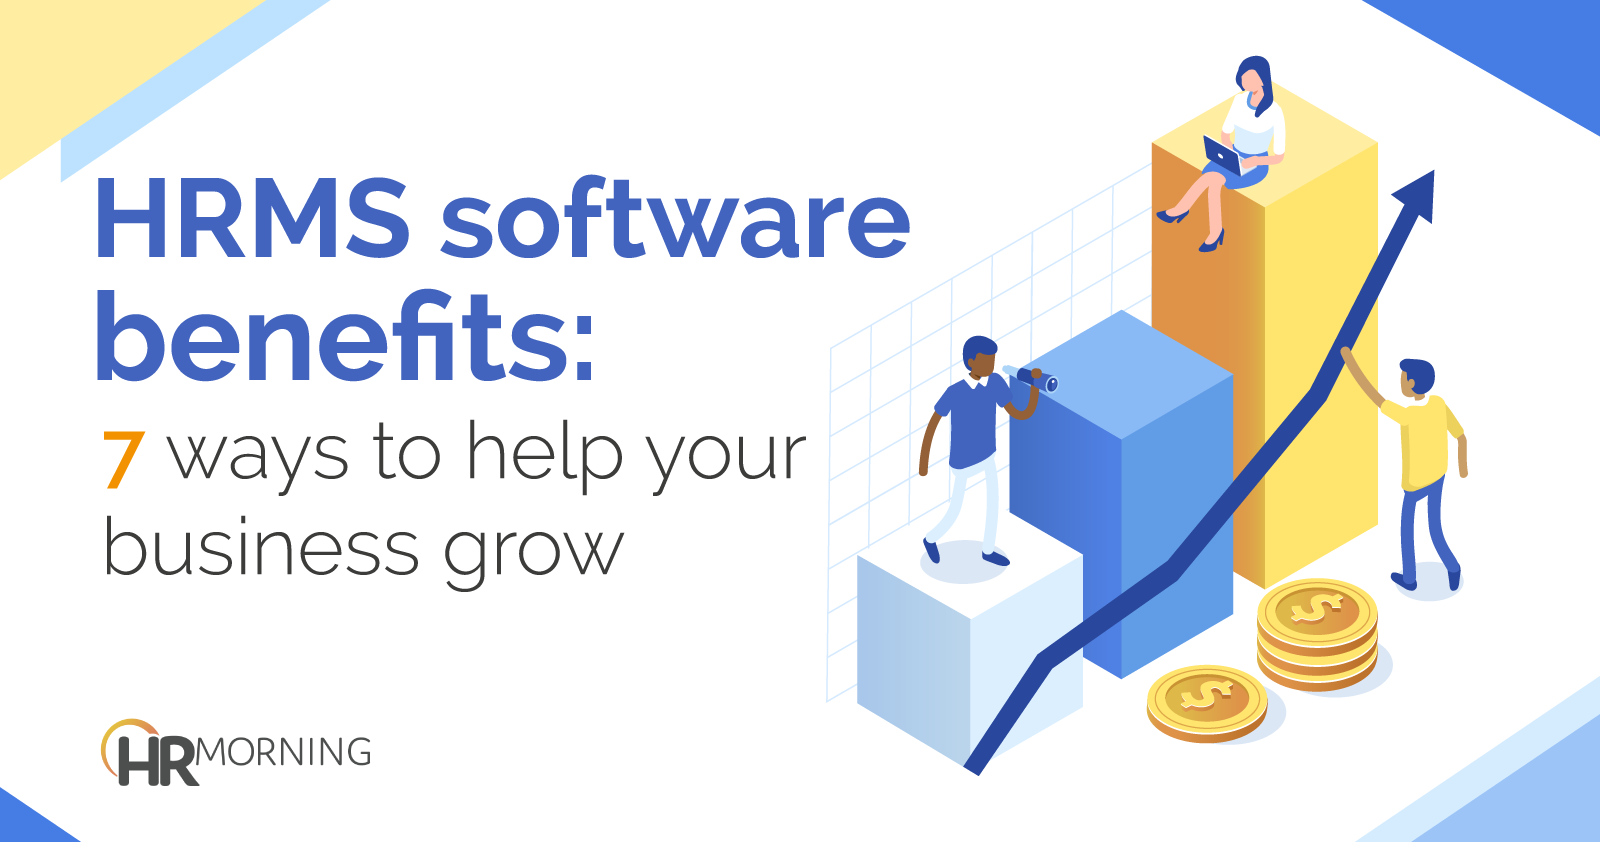 HRMS software benefits